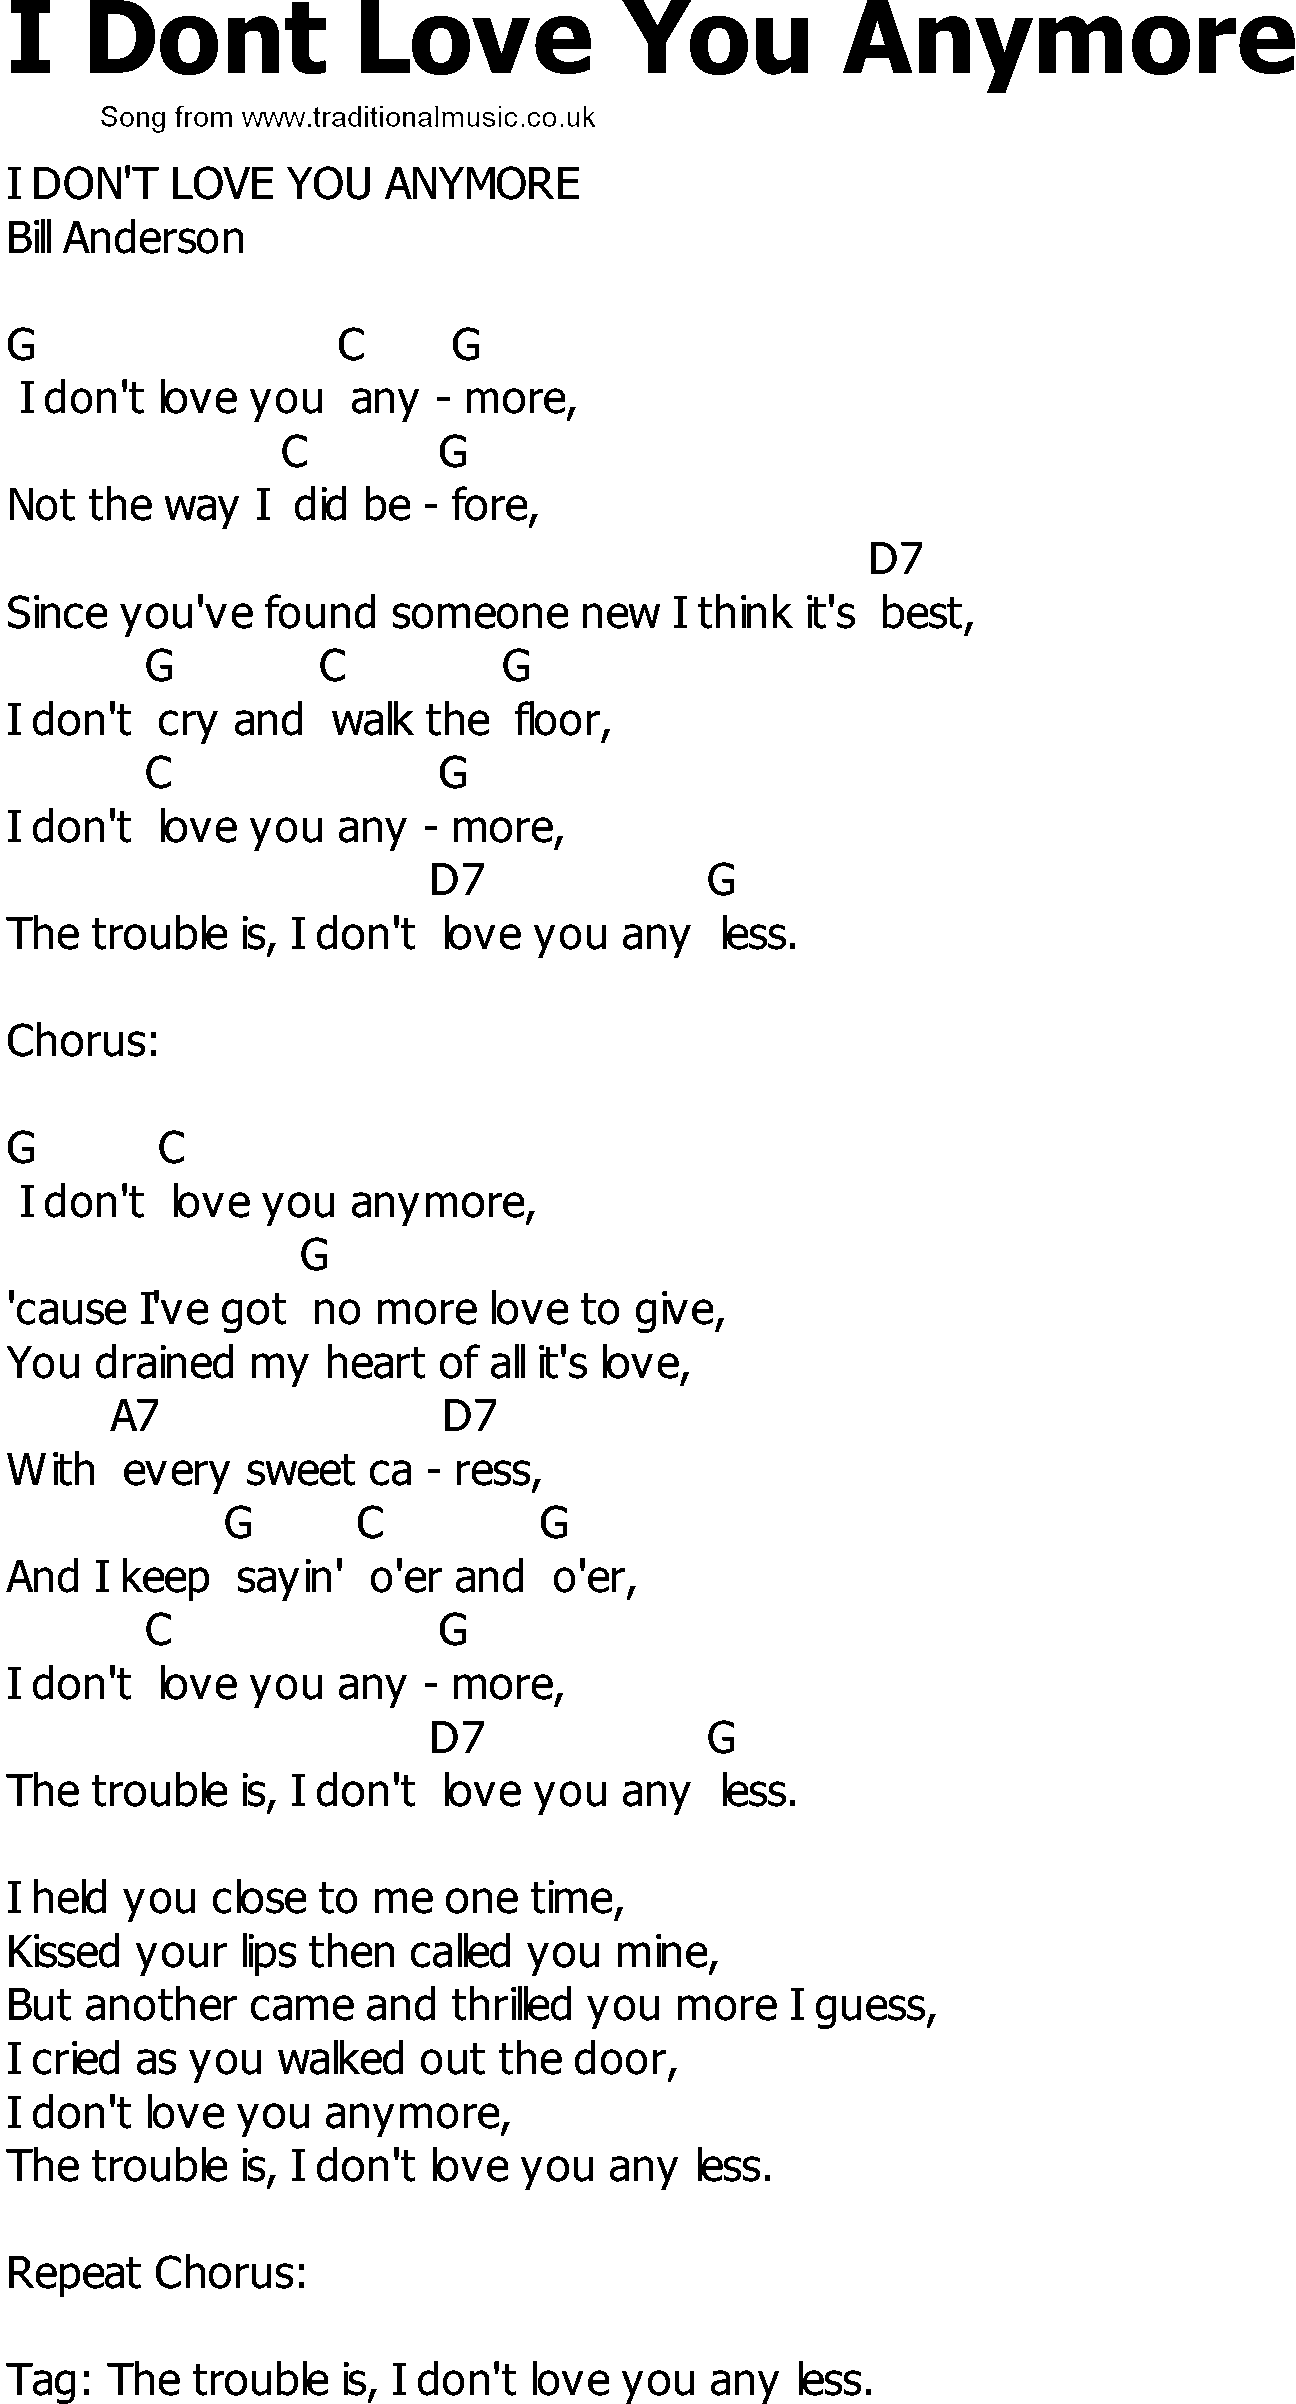 Old Country song lyrics with chords - I Dont Love You Anymore